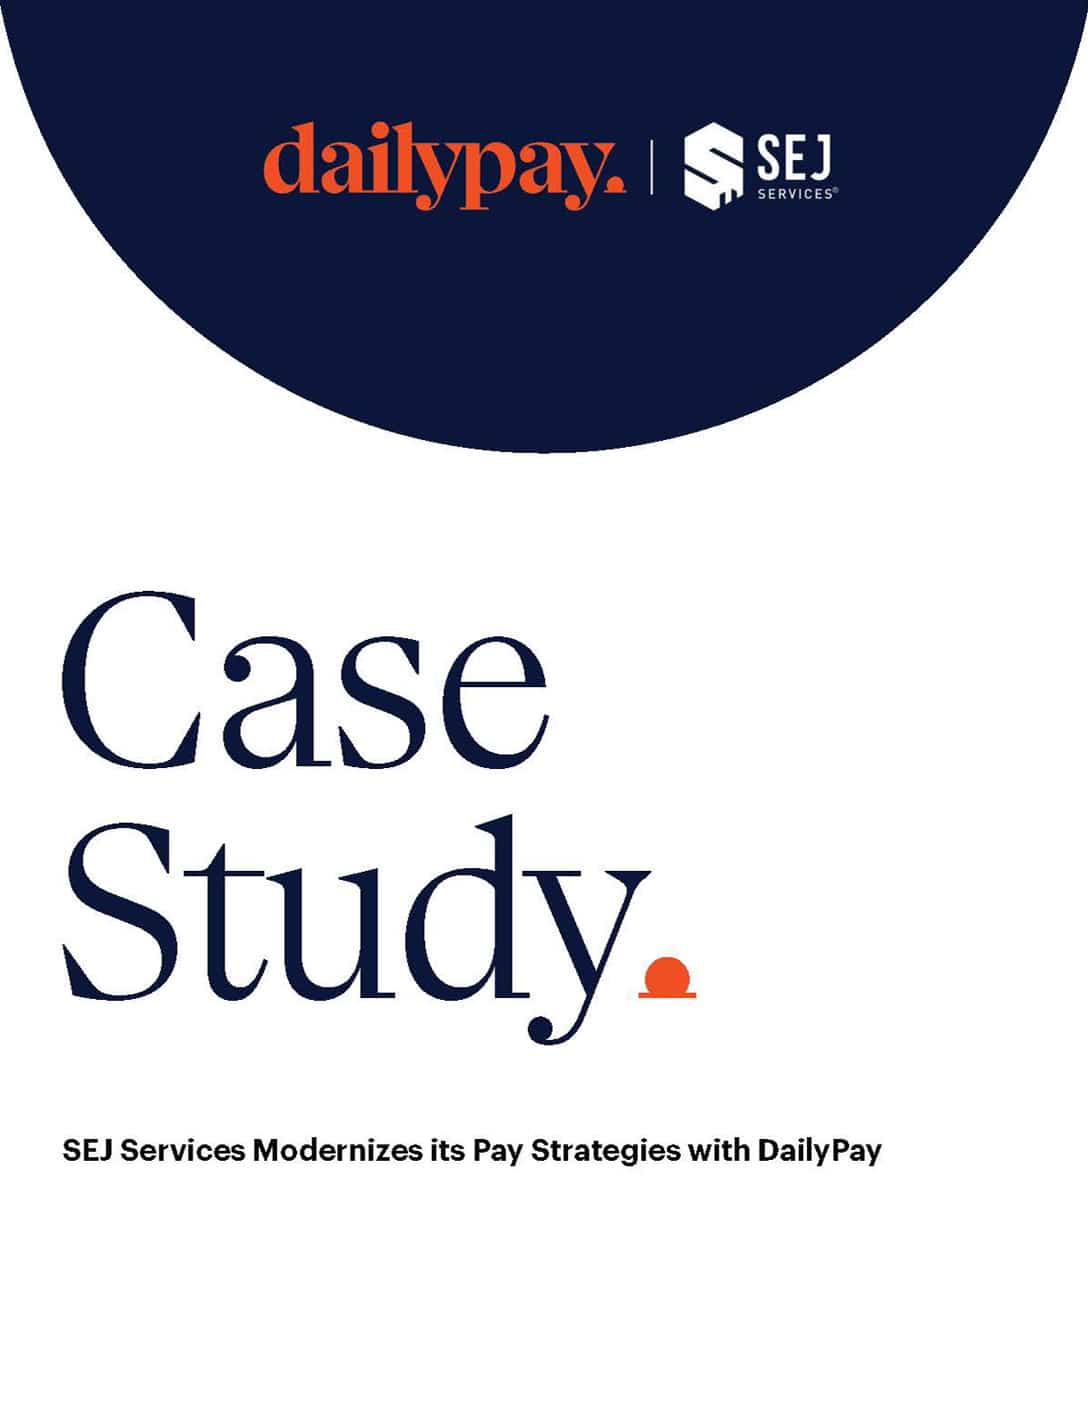 An image of a case study cover. The top half contains a navy blue semicircle with "dailypay" in orange and the SEJ Services logo in white. Below, text reads "Case Study" in large navy font with an orange dot, followed by "SEJ Services Modernizes its Pay Strategies with DailyPay" in smaller black font.